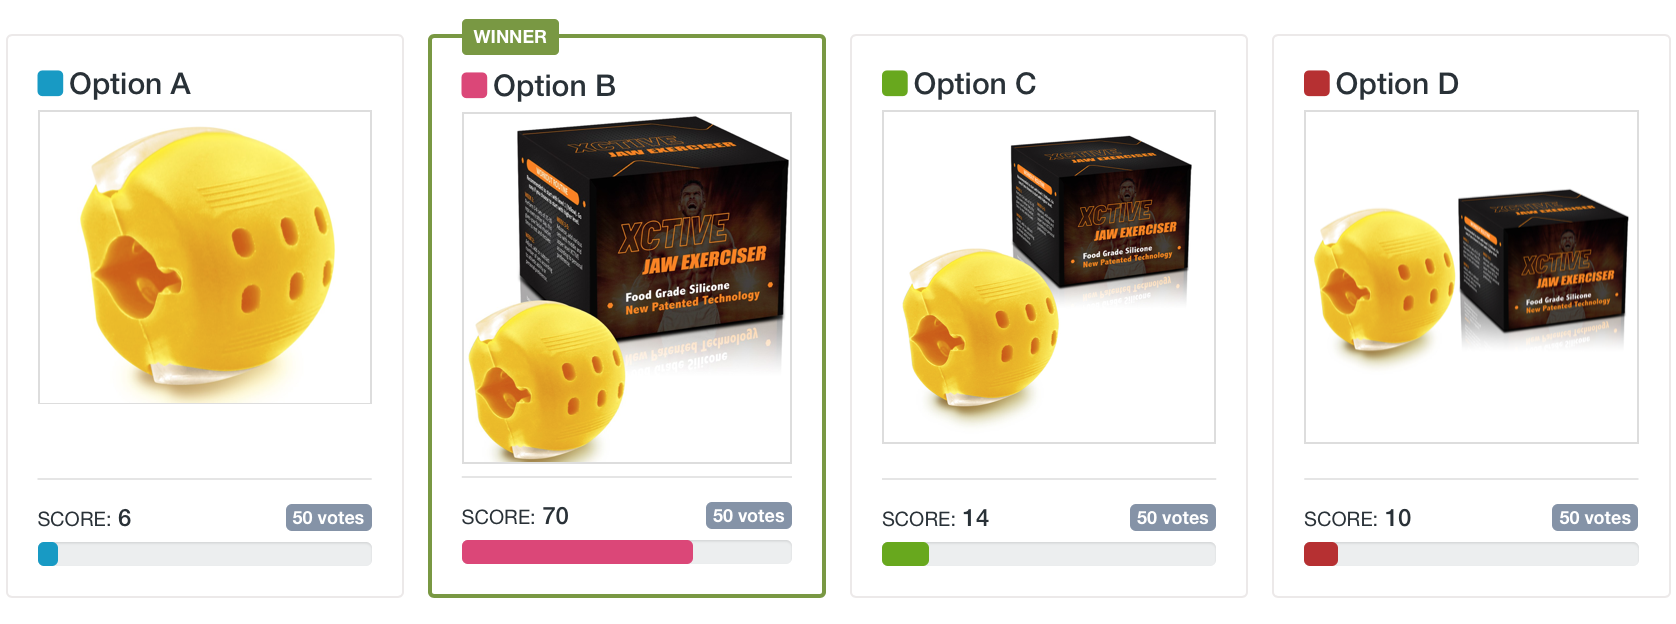 How to sell on Walmart Marketplace: PickFu poll testing four main image options for a yellow jaw exerciser 